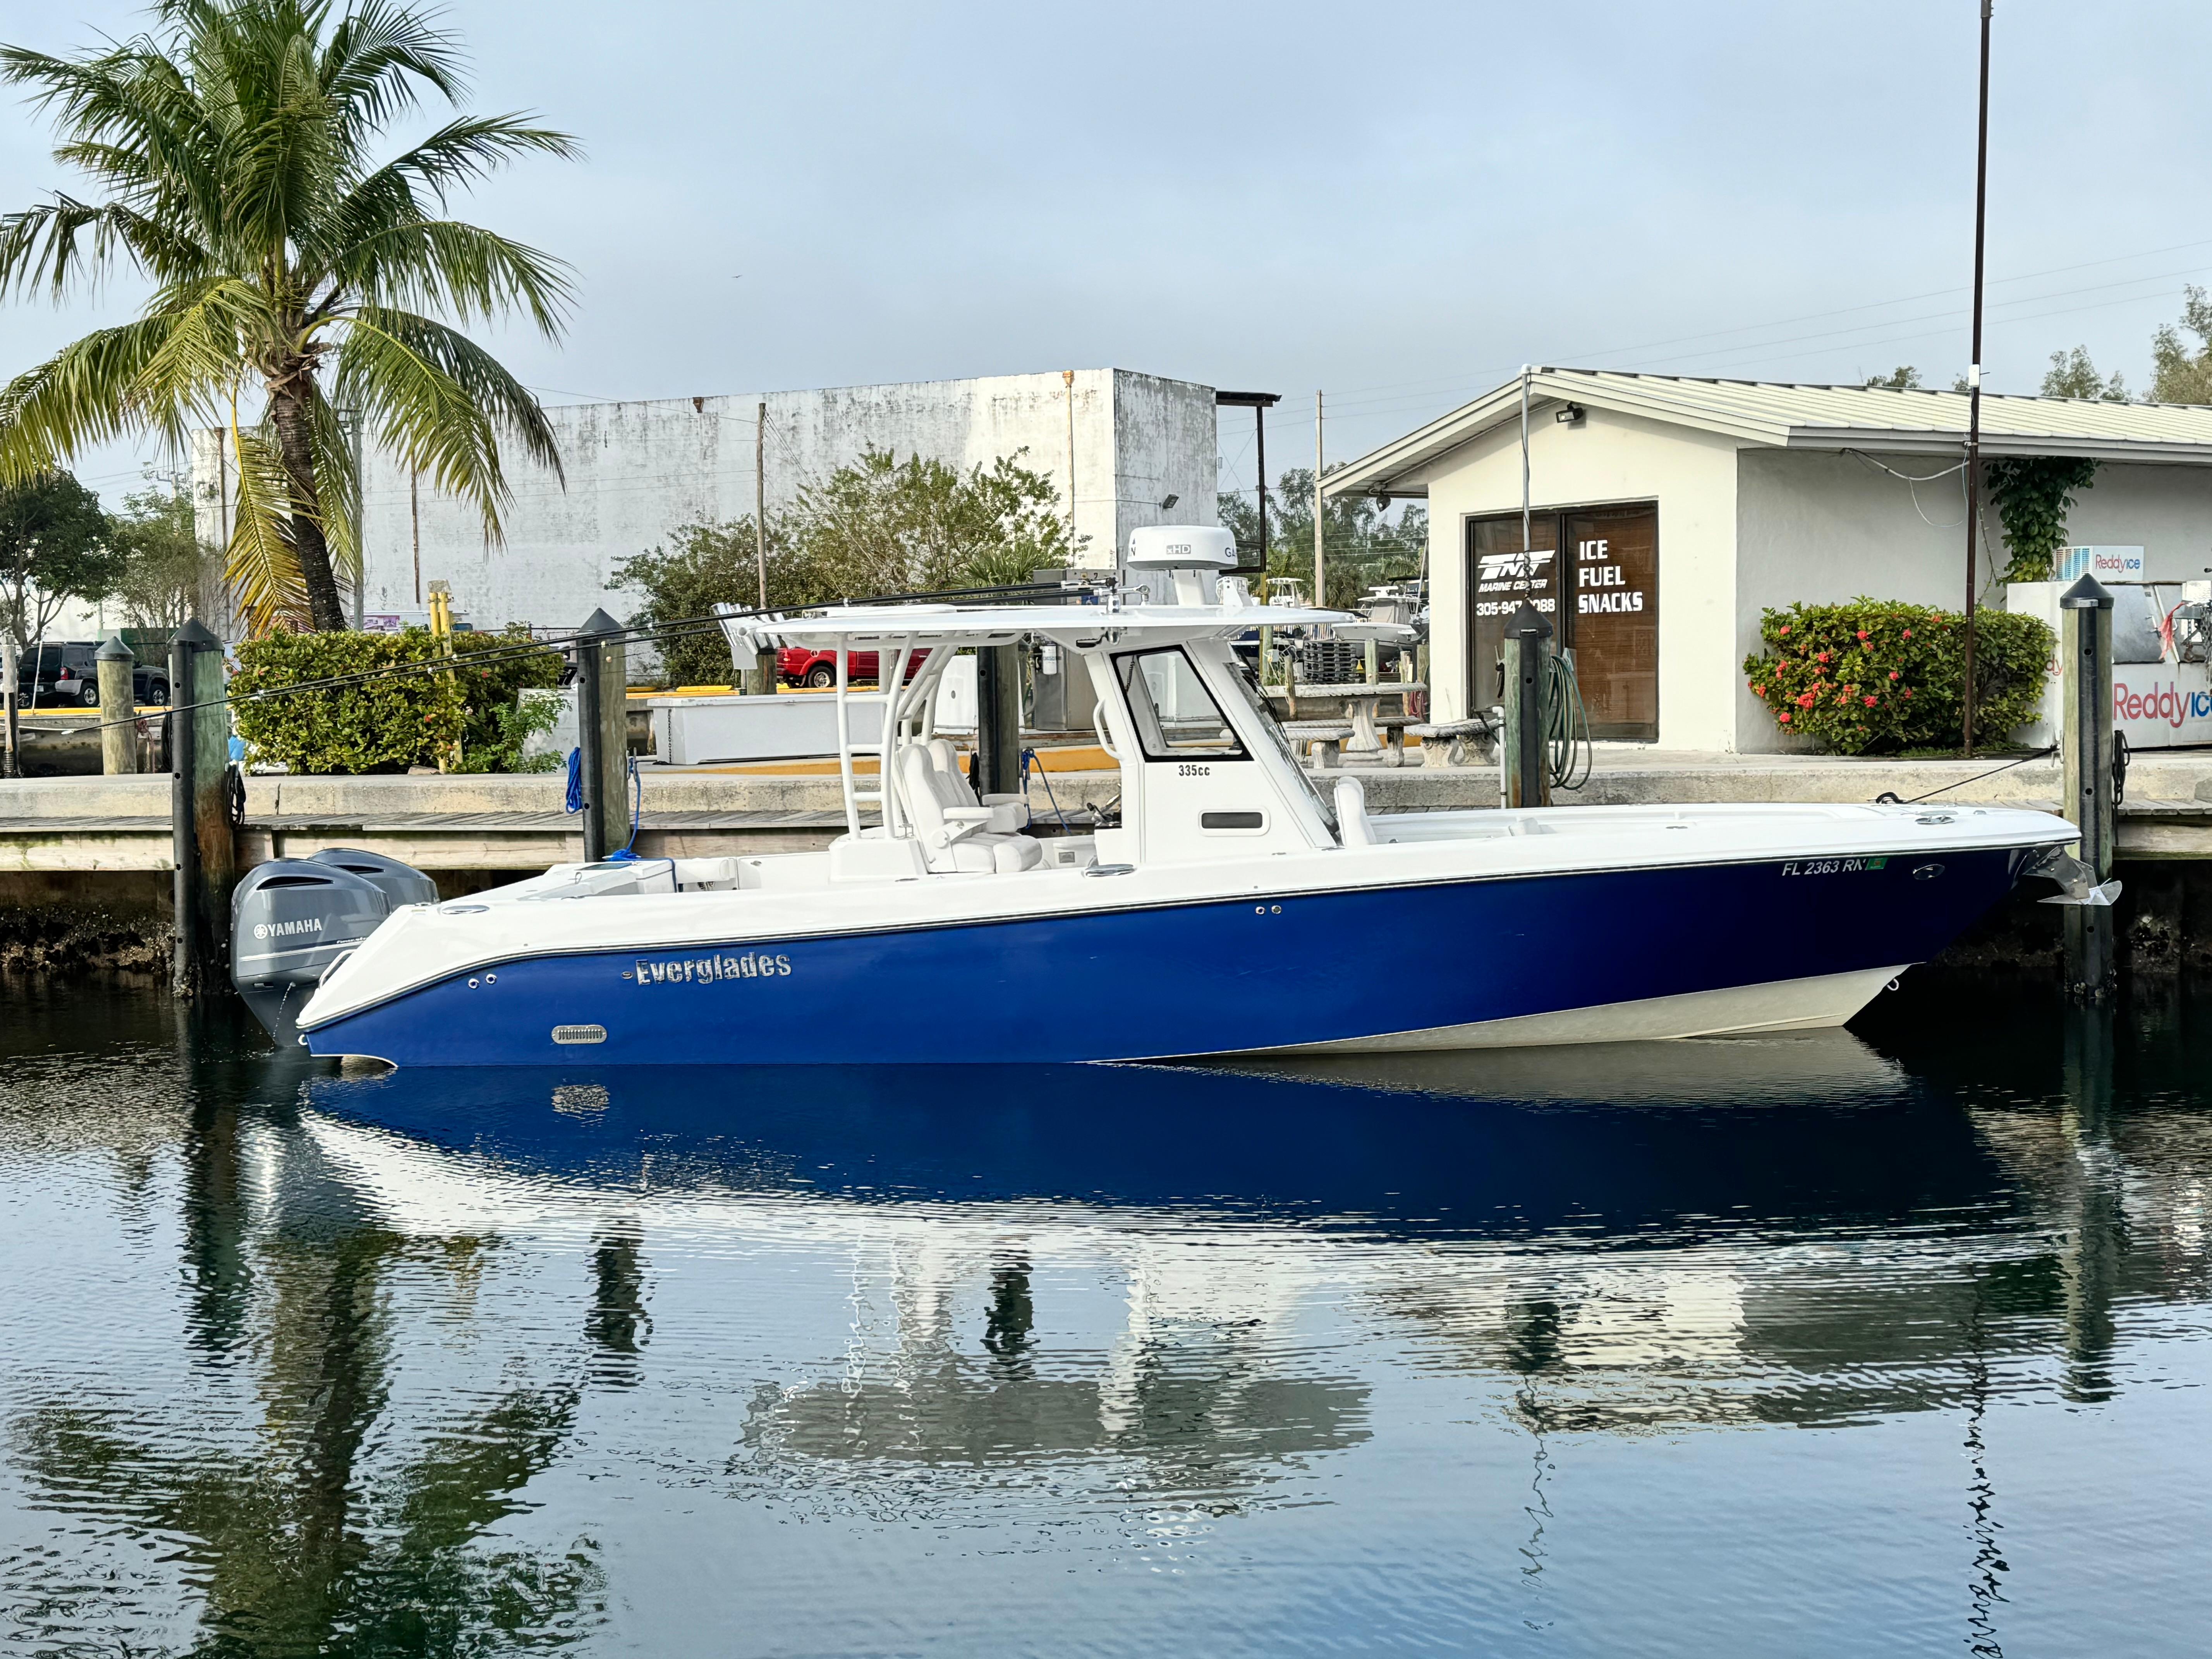 2018 Everglades 335 Center Console for sale - YachtWorld